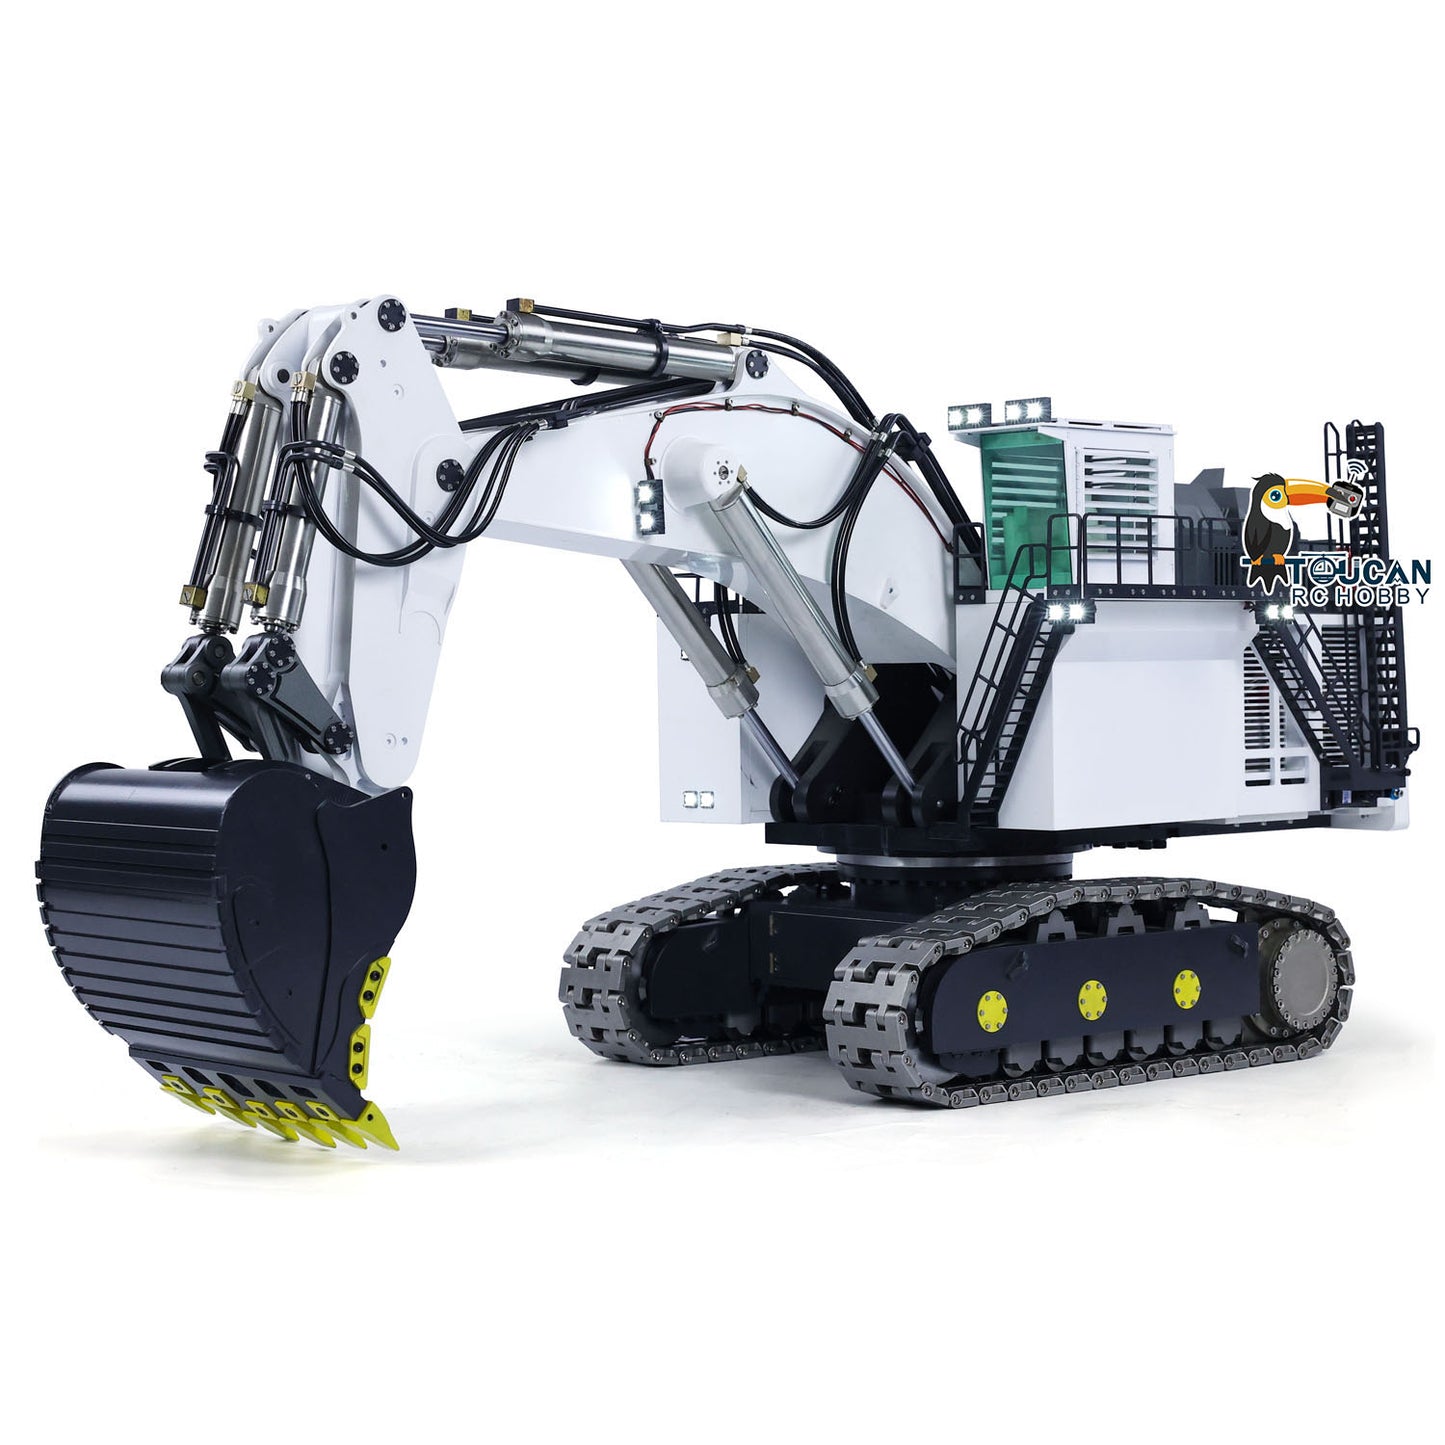 1/25 Double-pump Hydraulic RC Excavator RTR R9800 Diggers With Sound